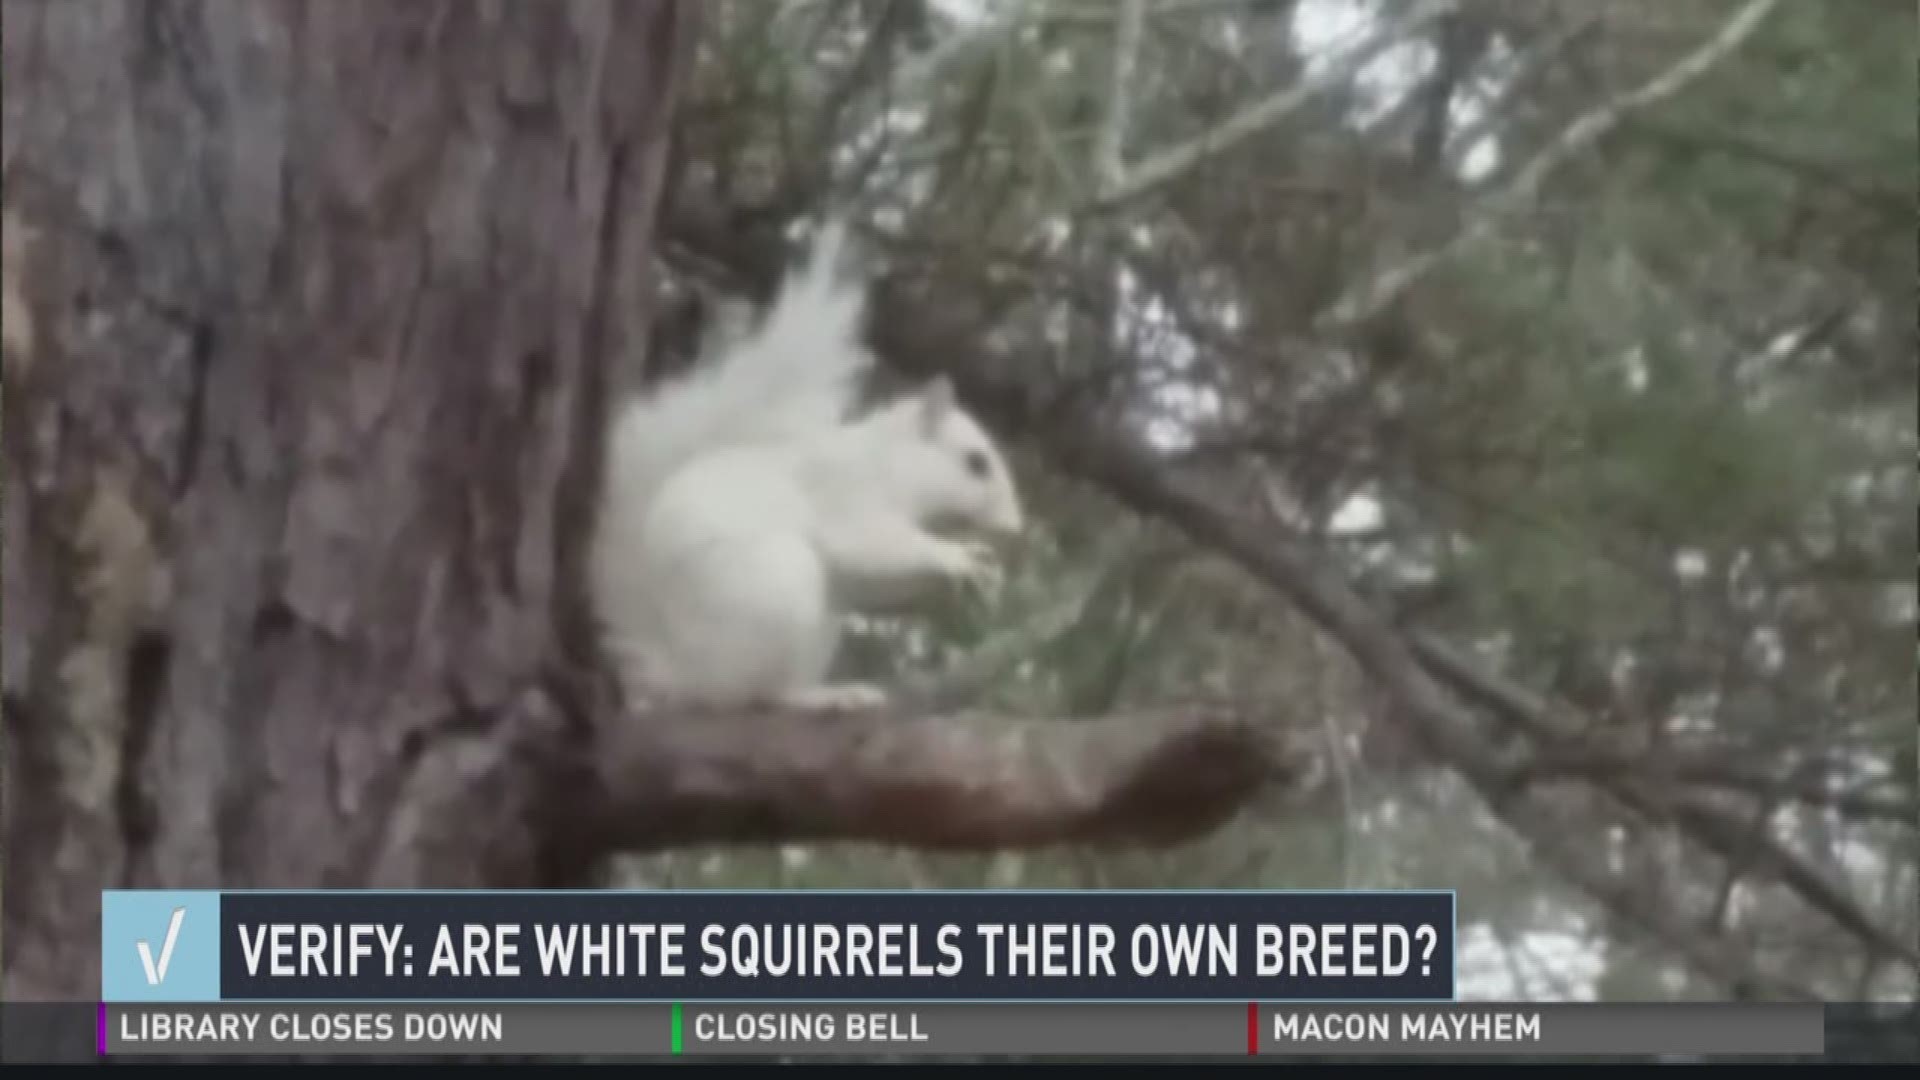 Verify: Are white squirrels their own breed?